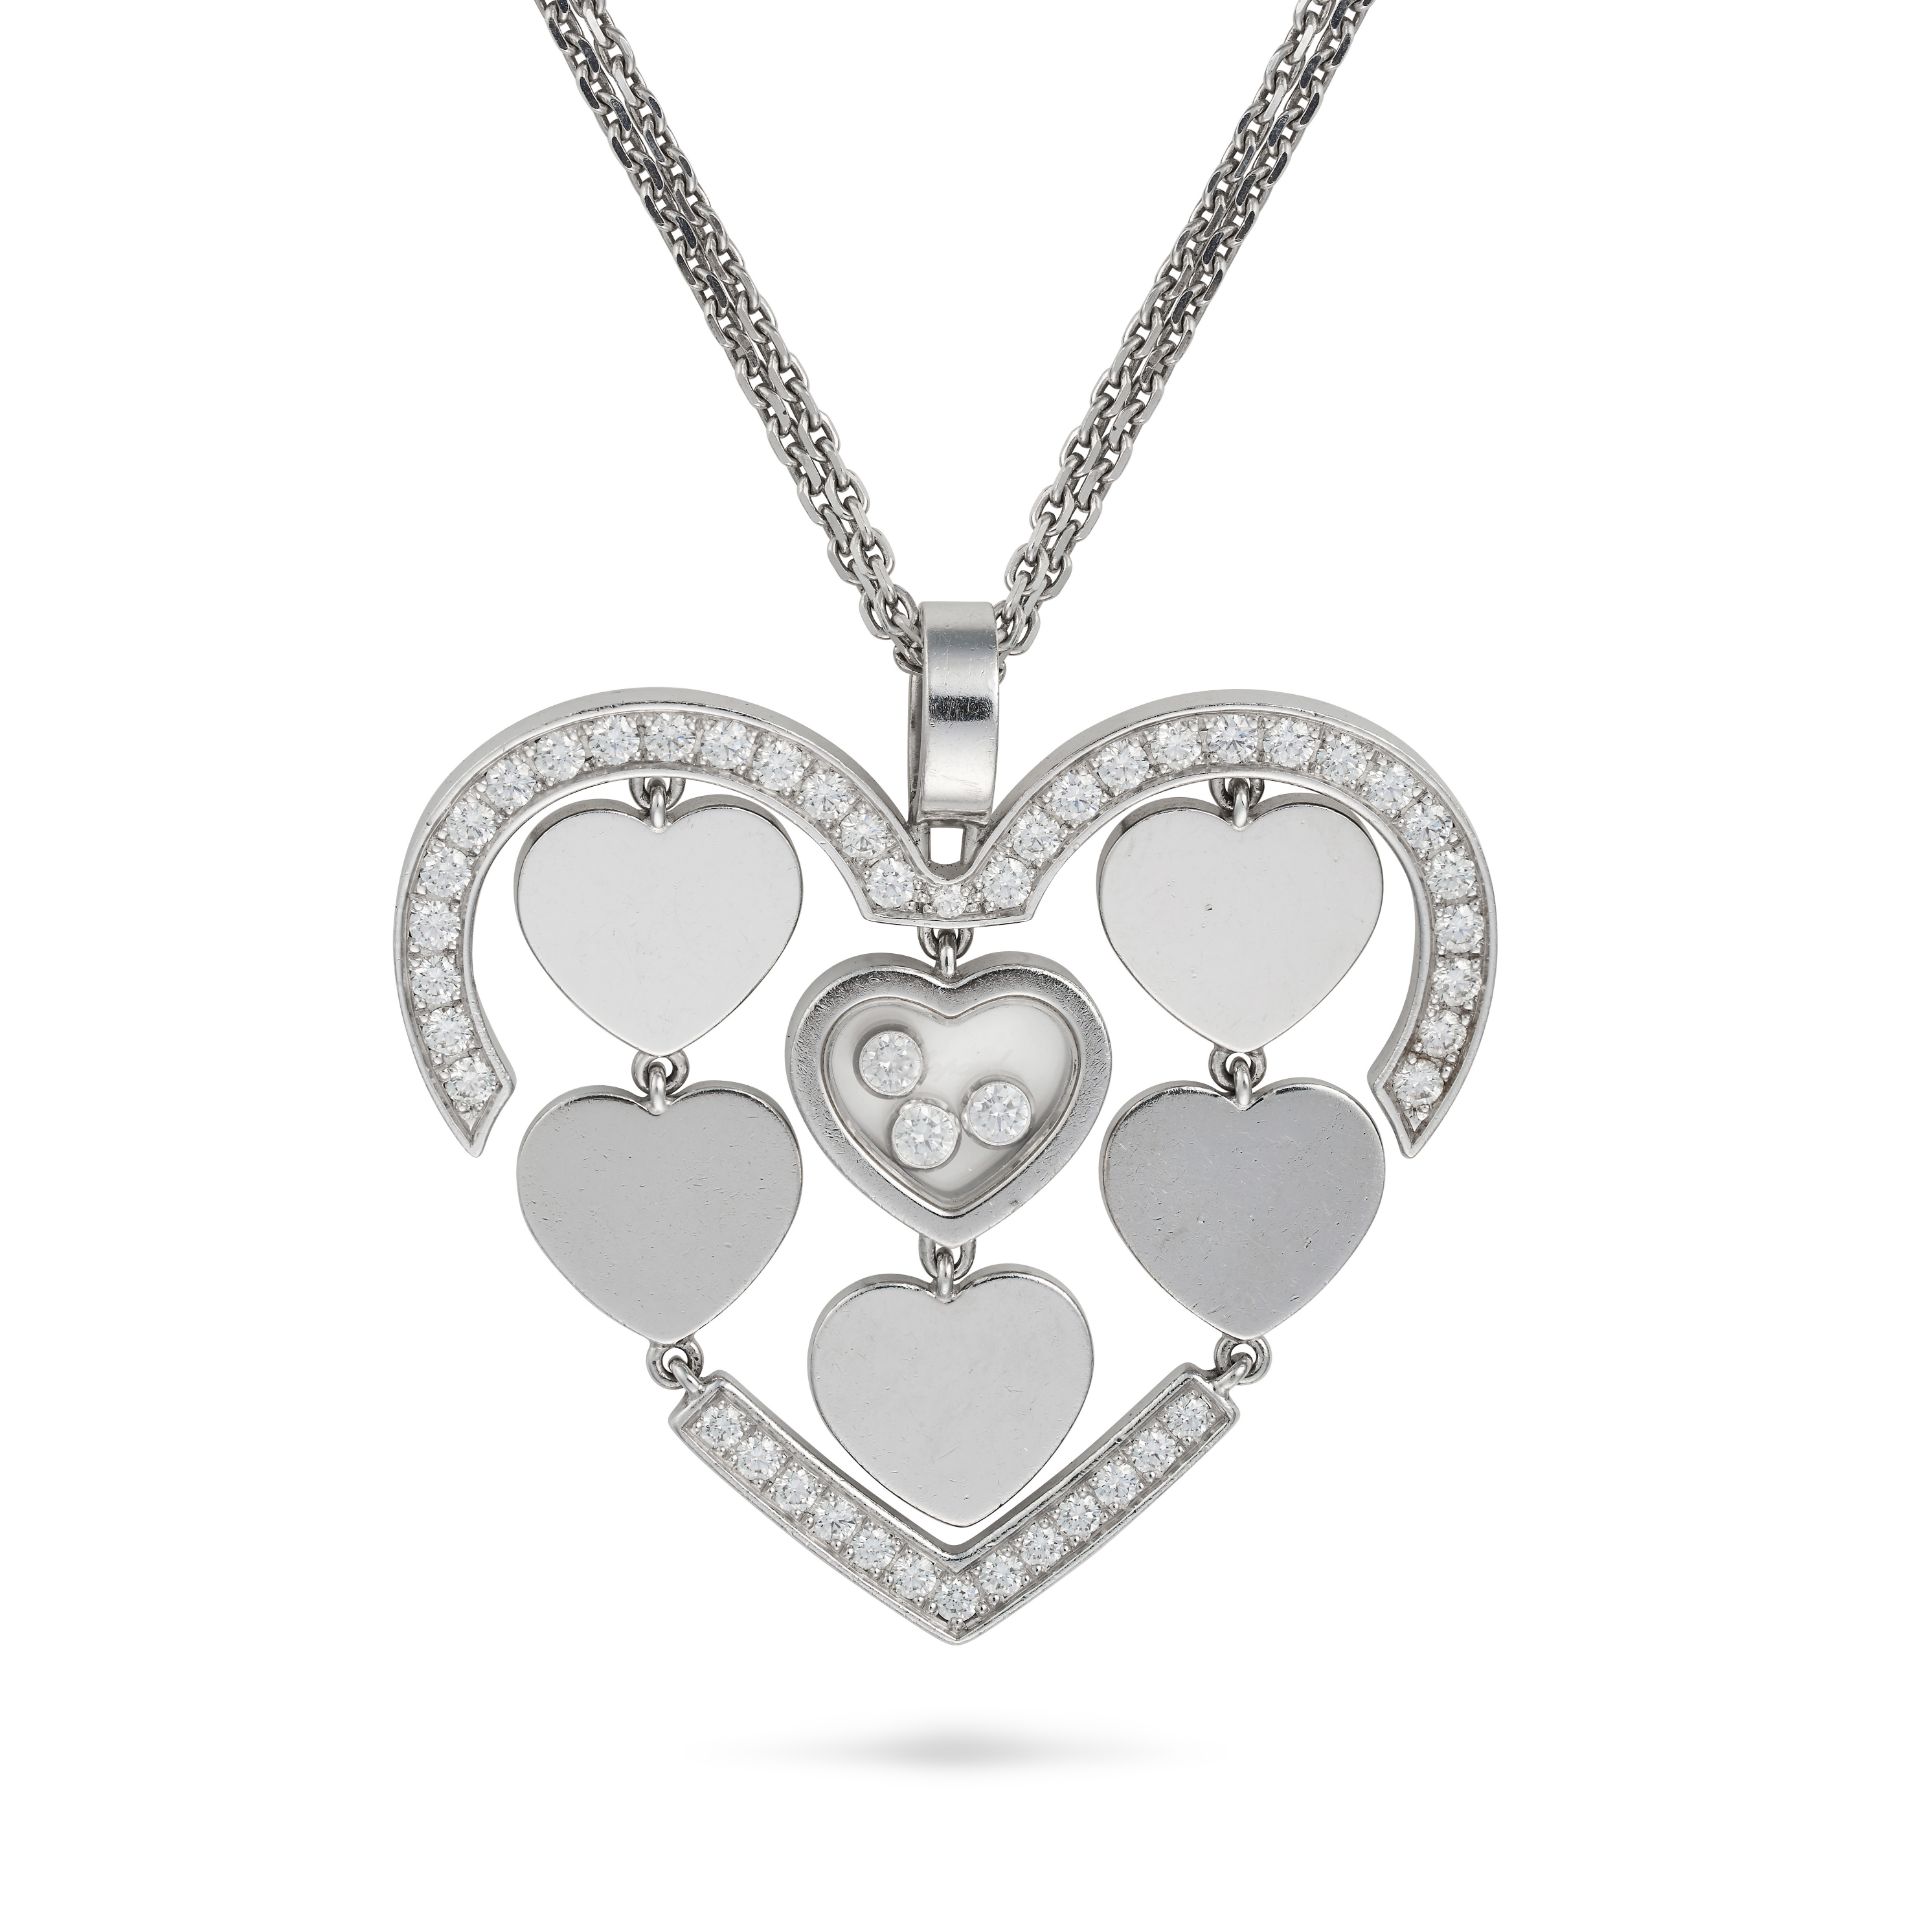 CHOPARD, A DIAMOND HAPPY AMORE PENDANT NECKLACE the openwork pendant designed as a heart set with...